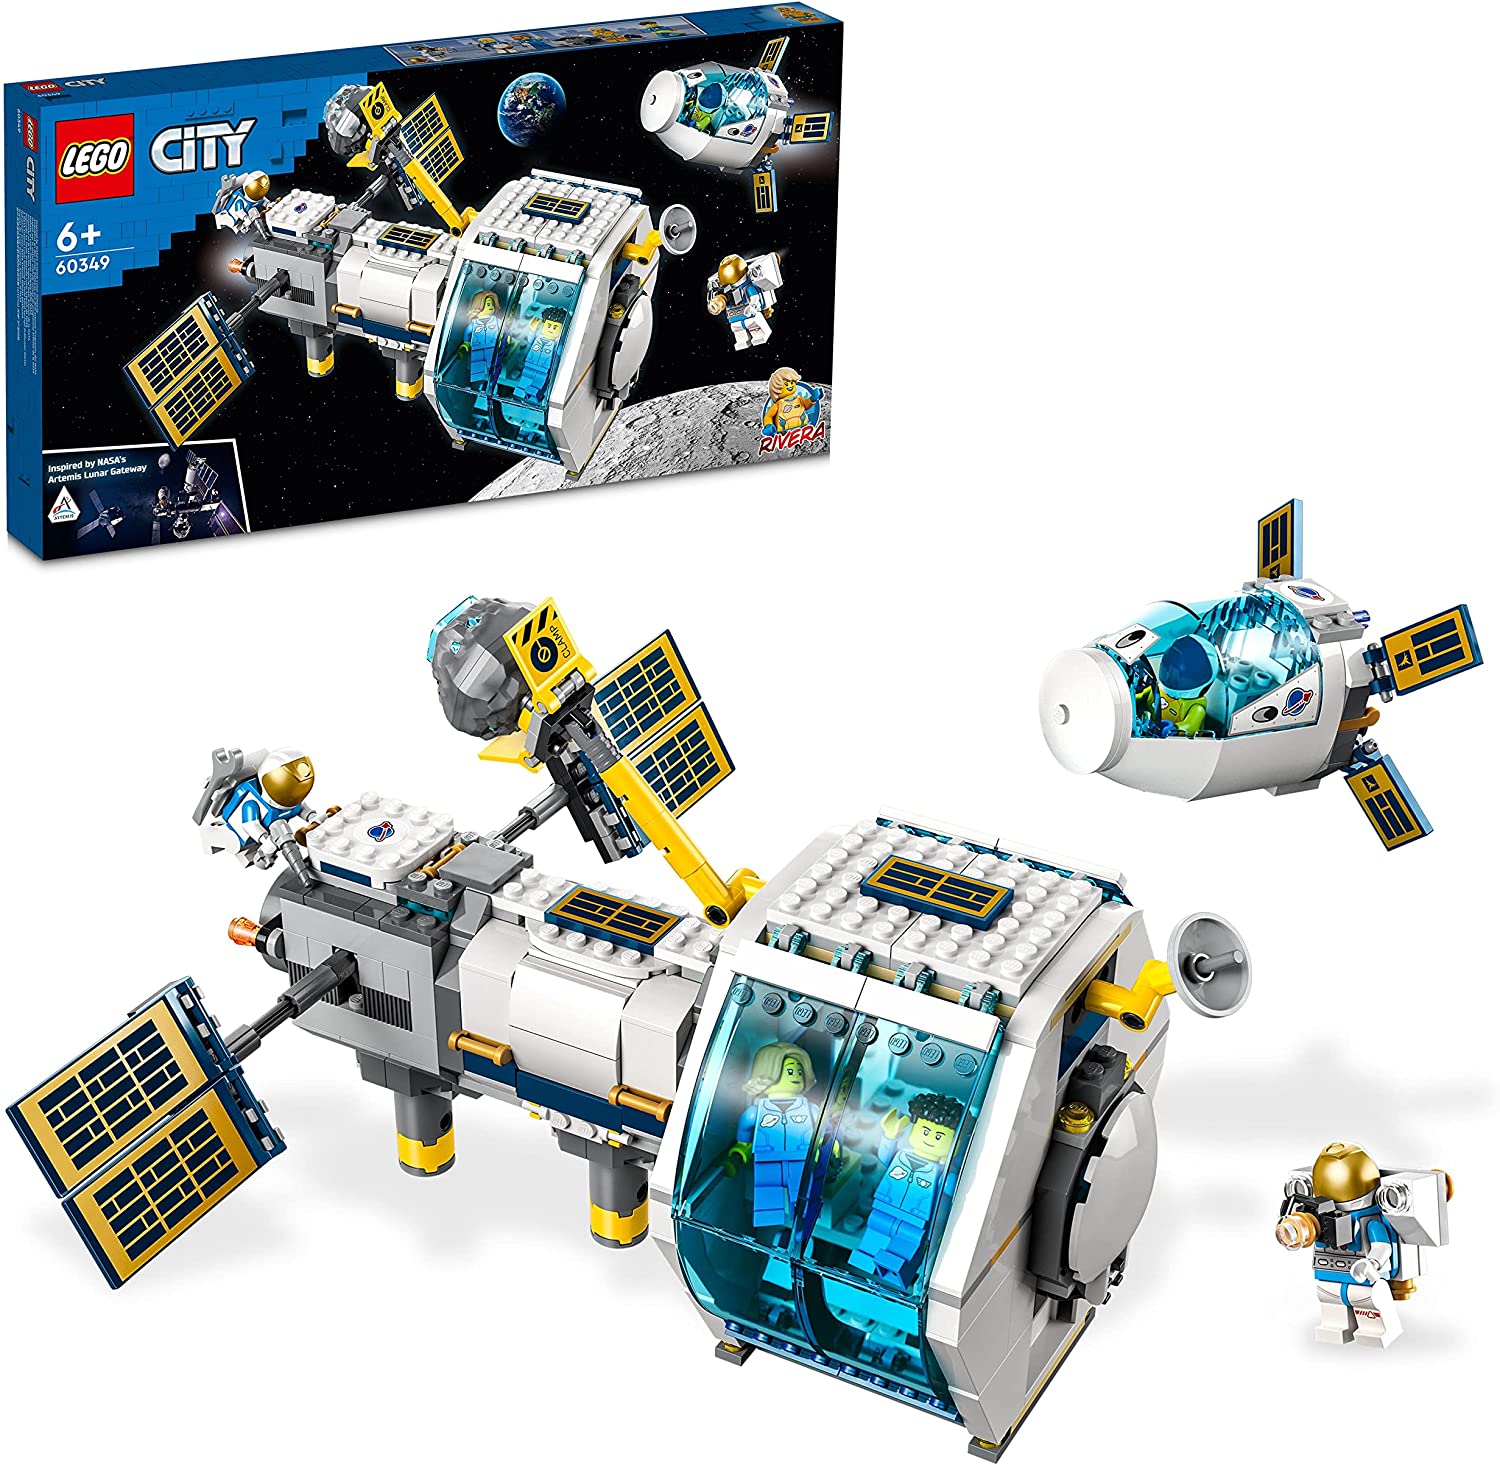 LEGO 60349 City Moon Space Station Space Toy from the LEGO NASA Series with Astronaut Mini Figures, Gift for Christmas from 6 Years